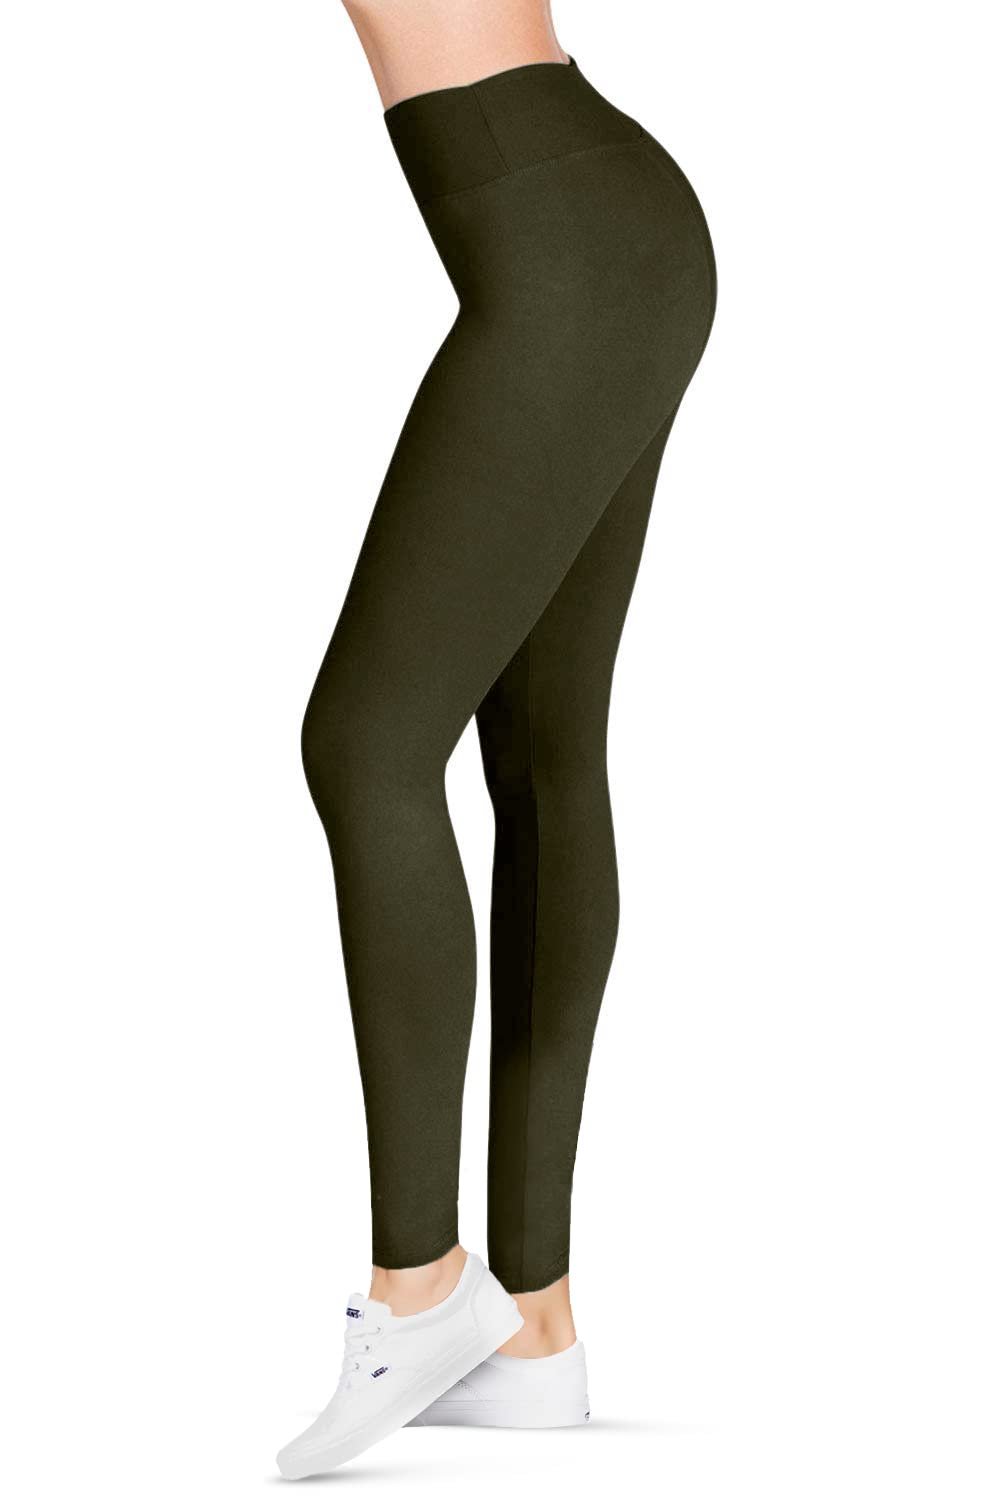 High Waisted Olive Leggings for Women | SATINA | Workout & Yoga | 3 Inch Waistband | Plus Size Available